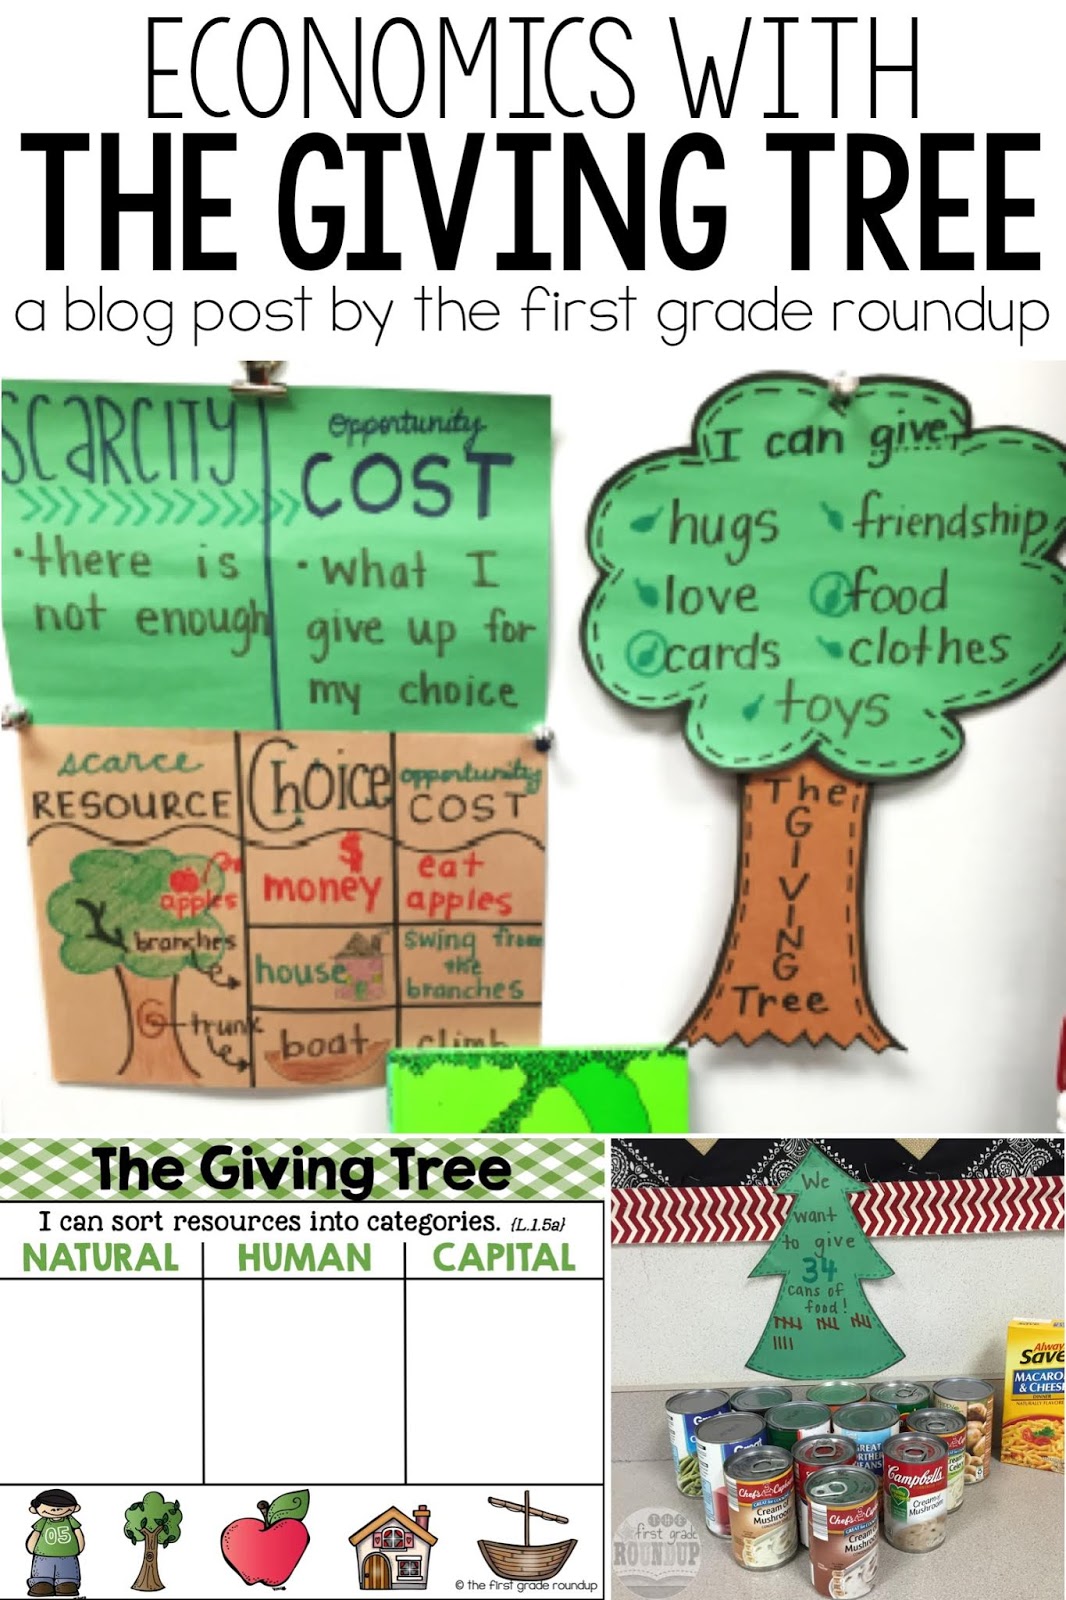 The Giving Tree Firstgraderoundup